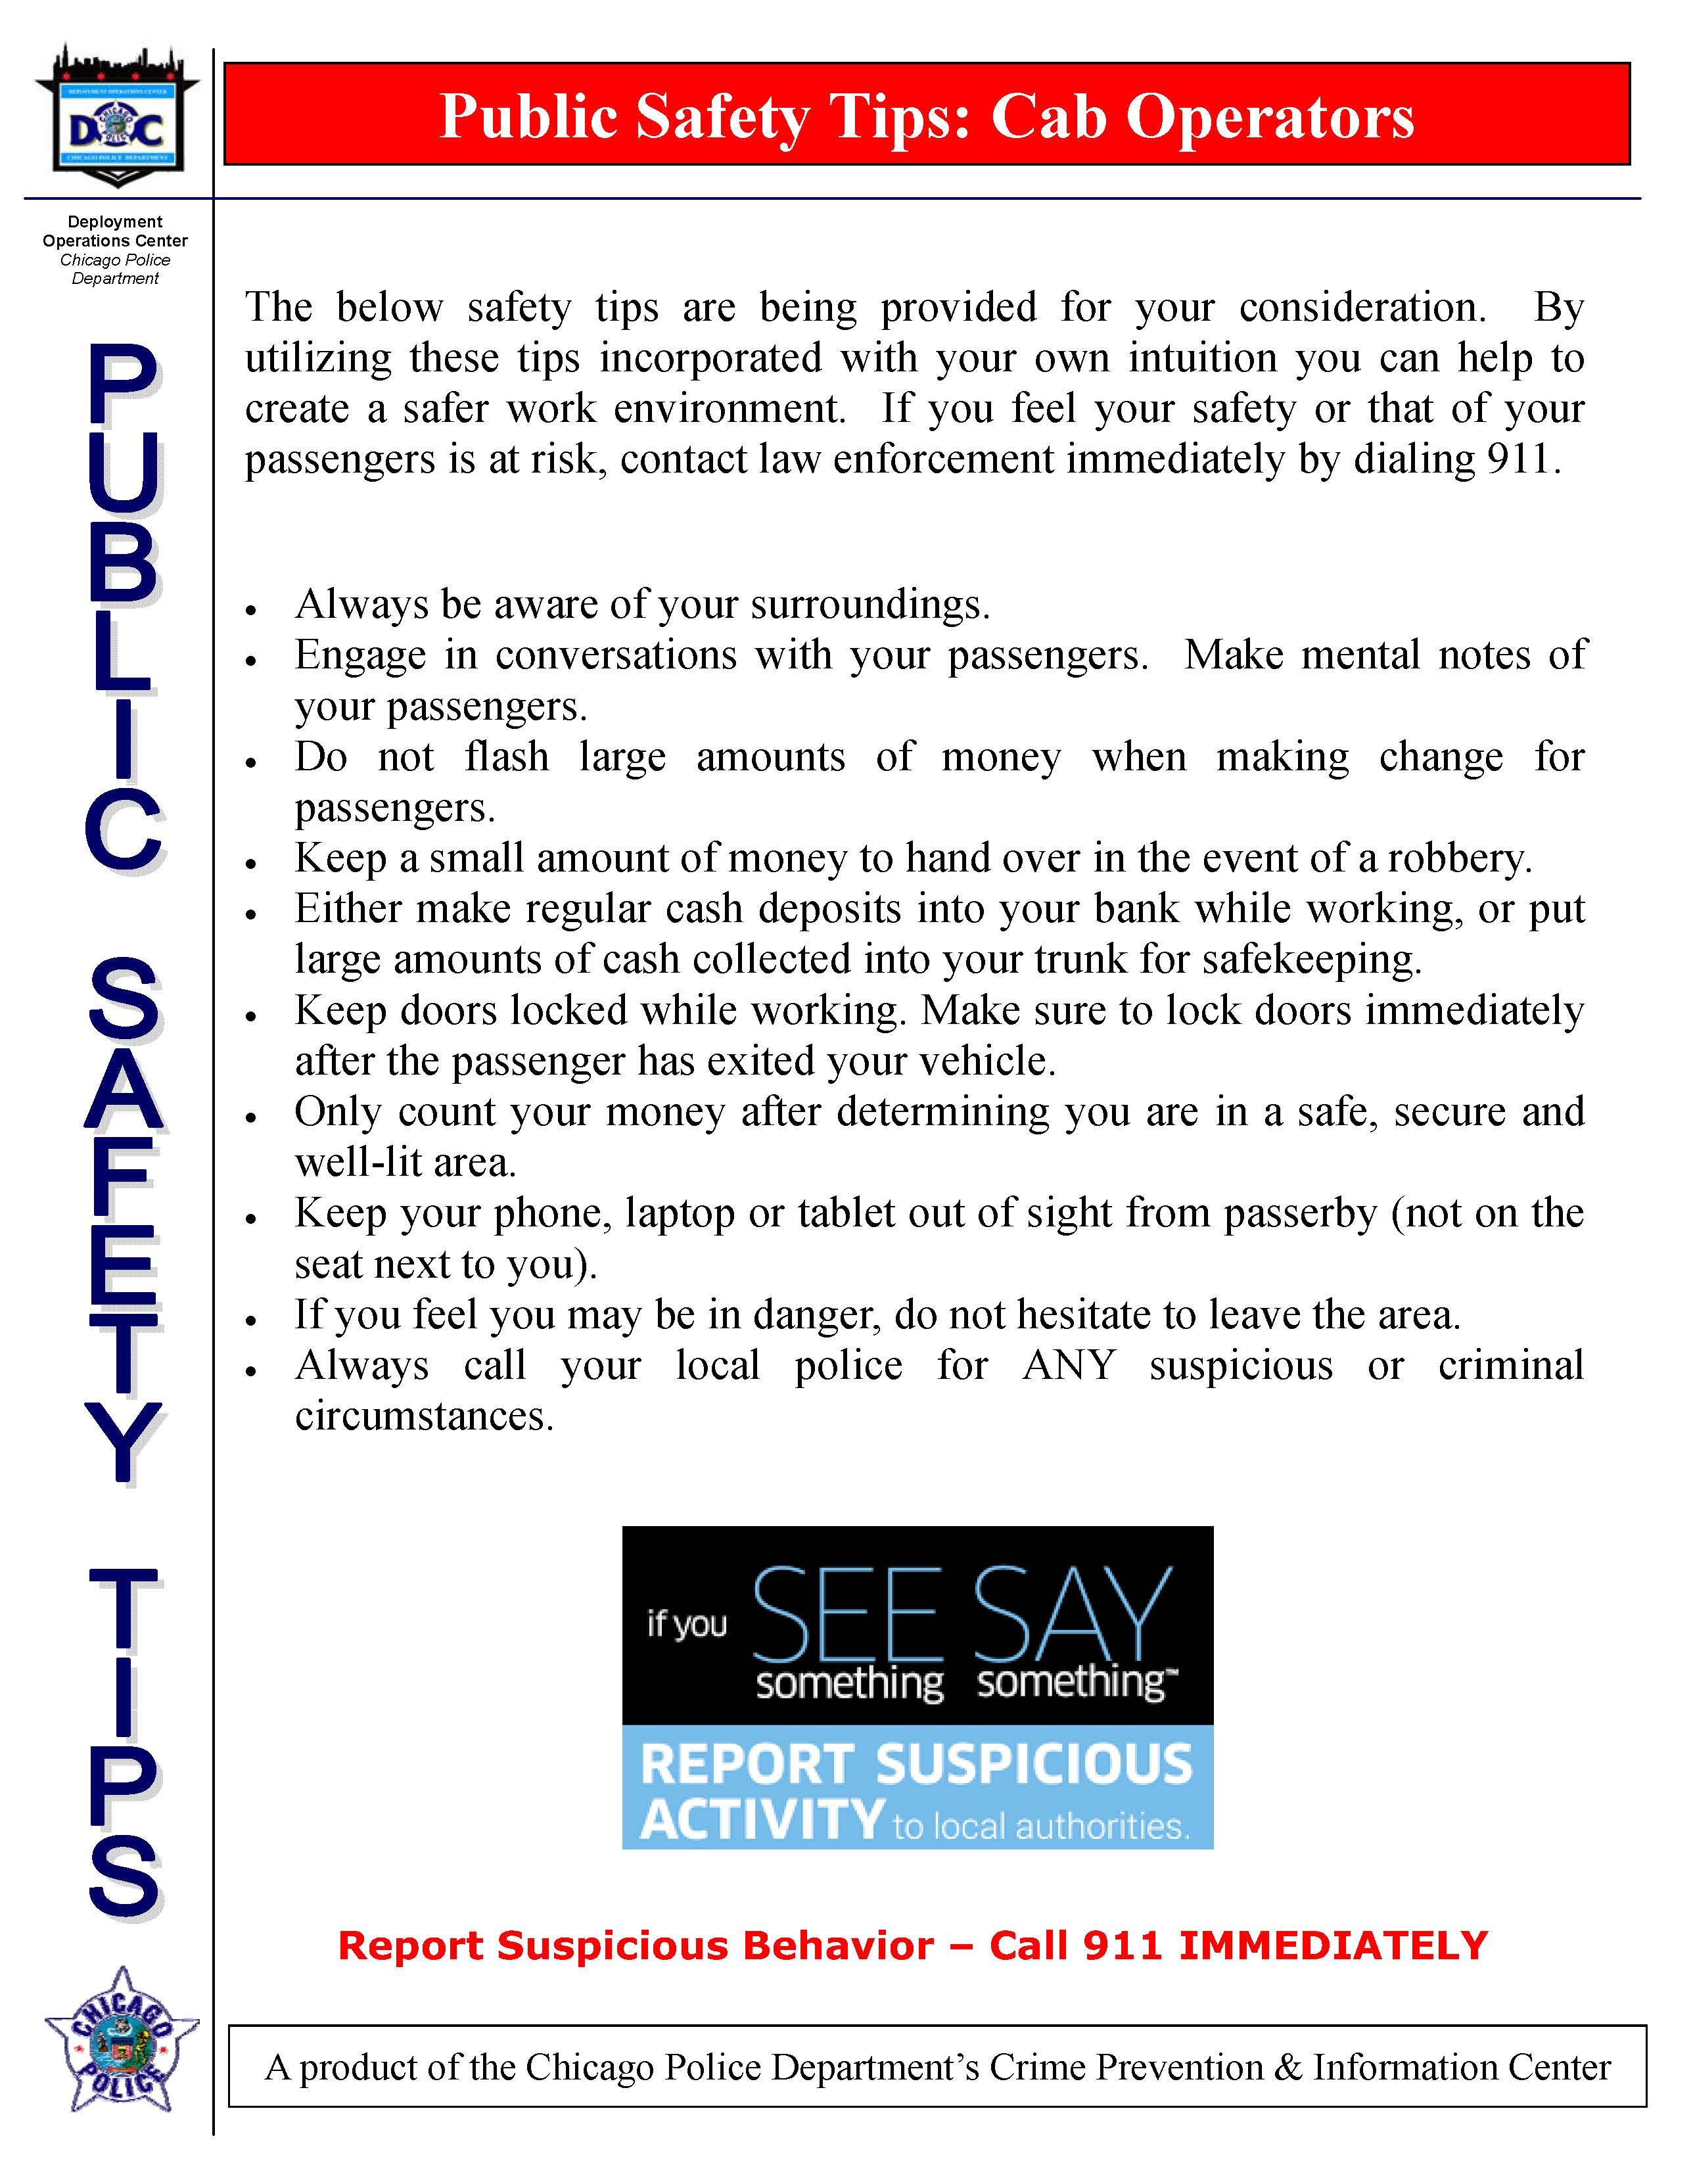 Public Safety Tips - Cab Operators